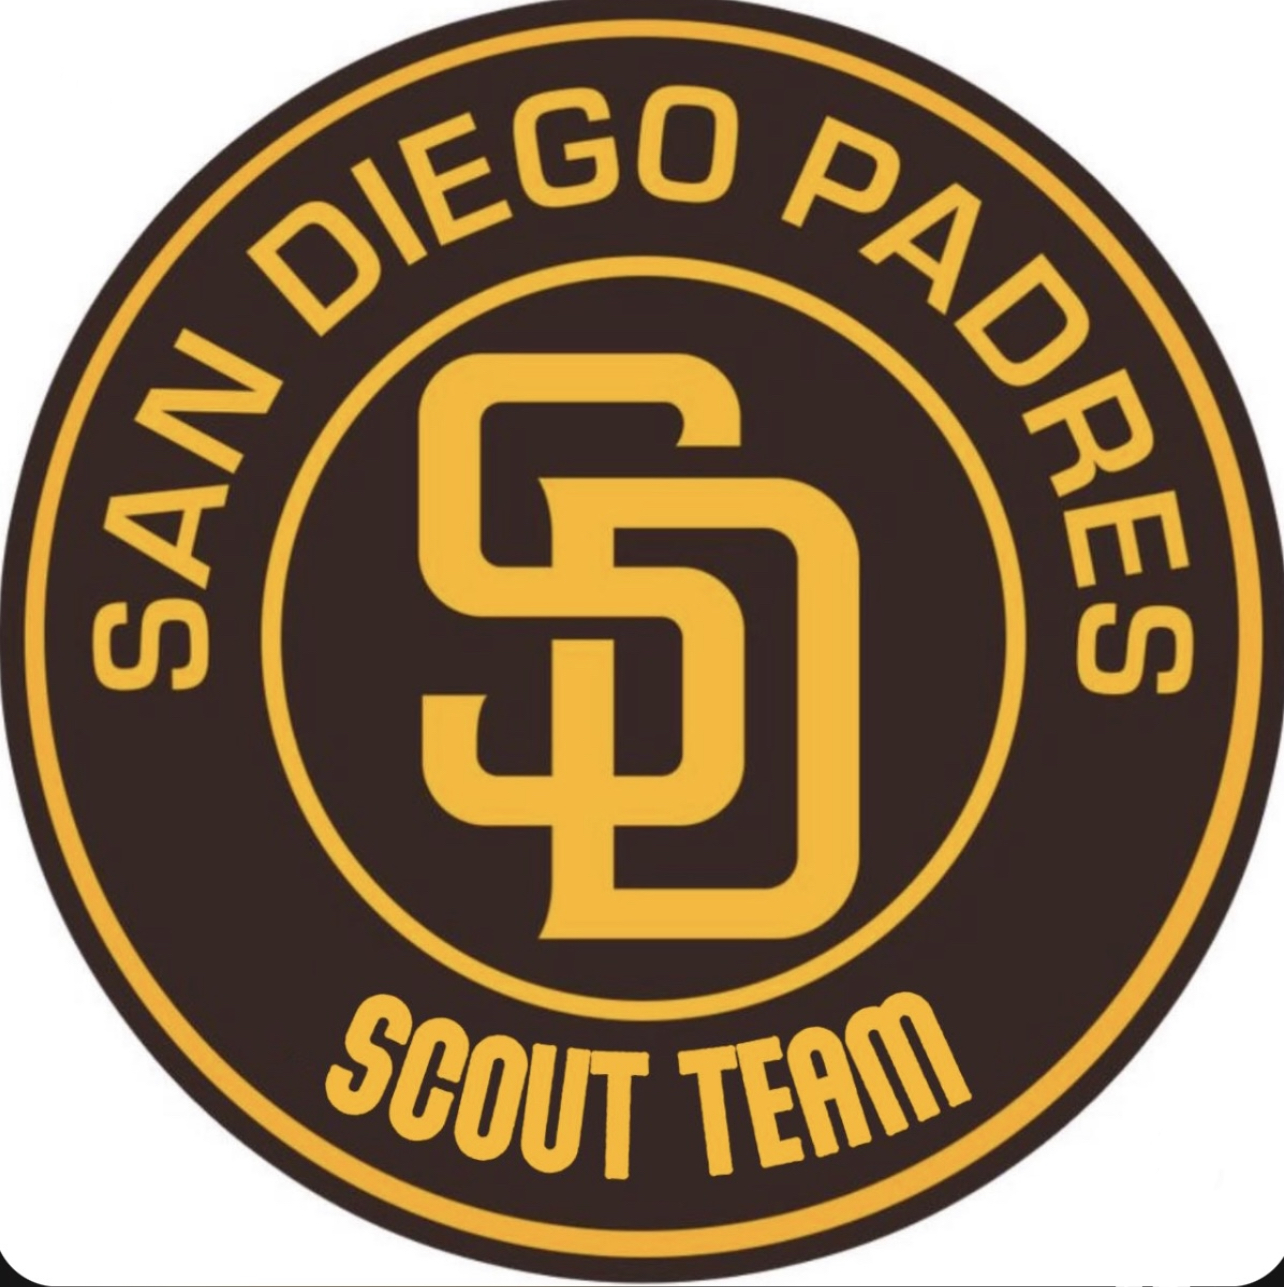 🇵🇷 Good luck to Padres Scout team - CE/Padres Scout Team